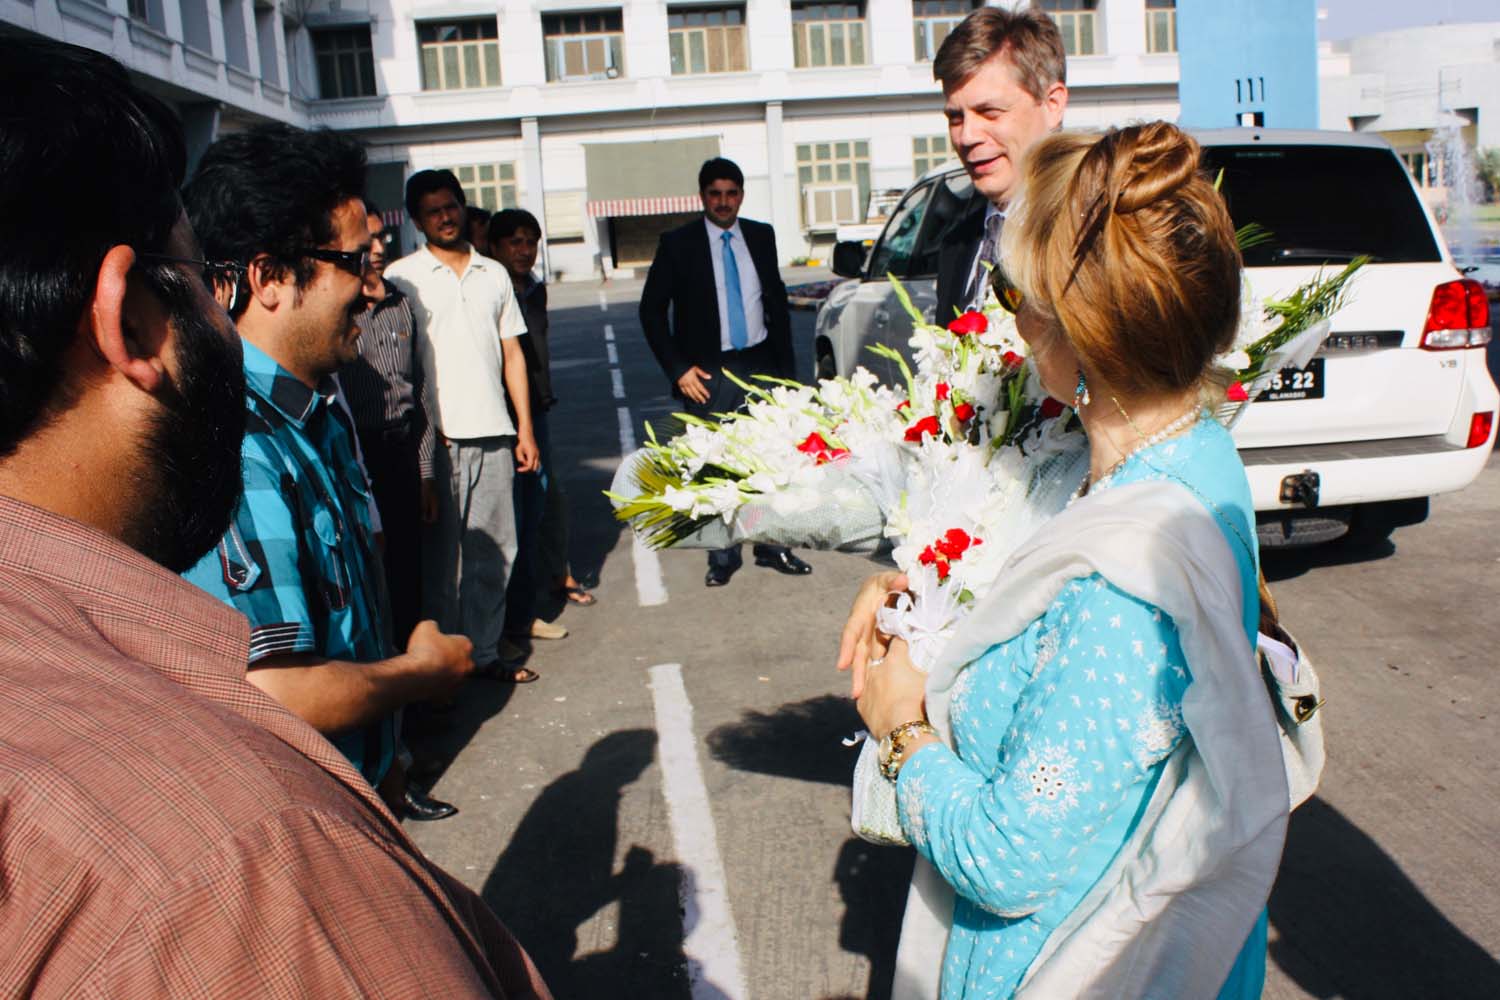 European Union Ambassador Mr. Lars Wigemark being welcomed to our premises on 27 May 2015.